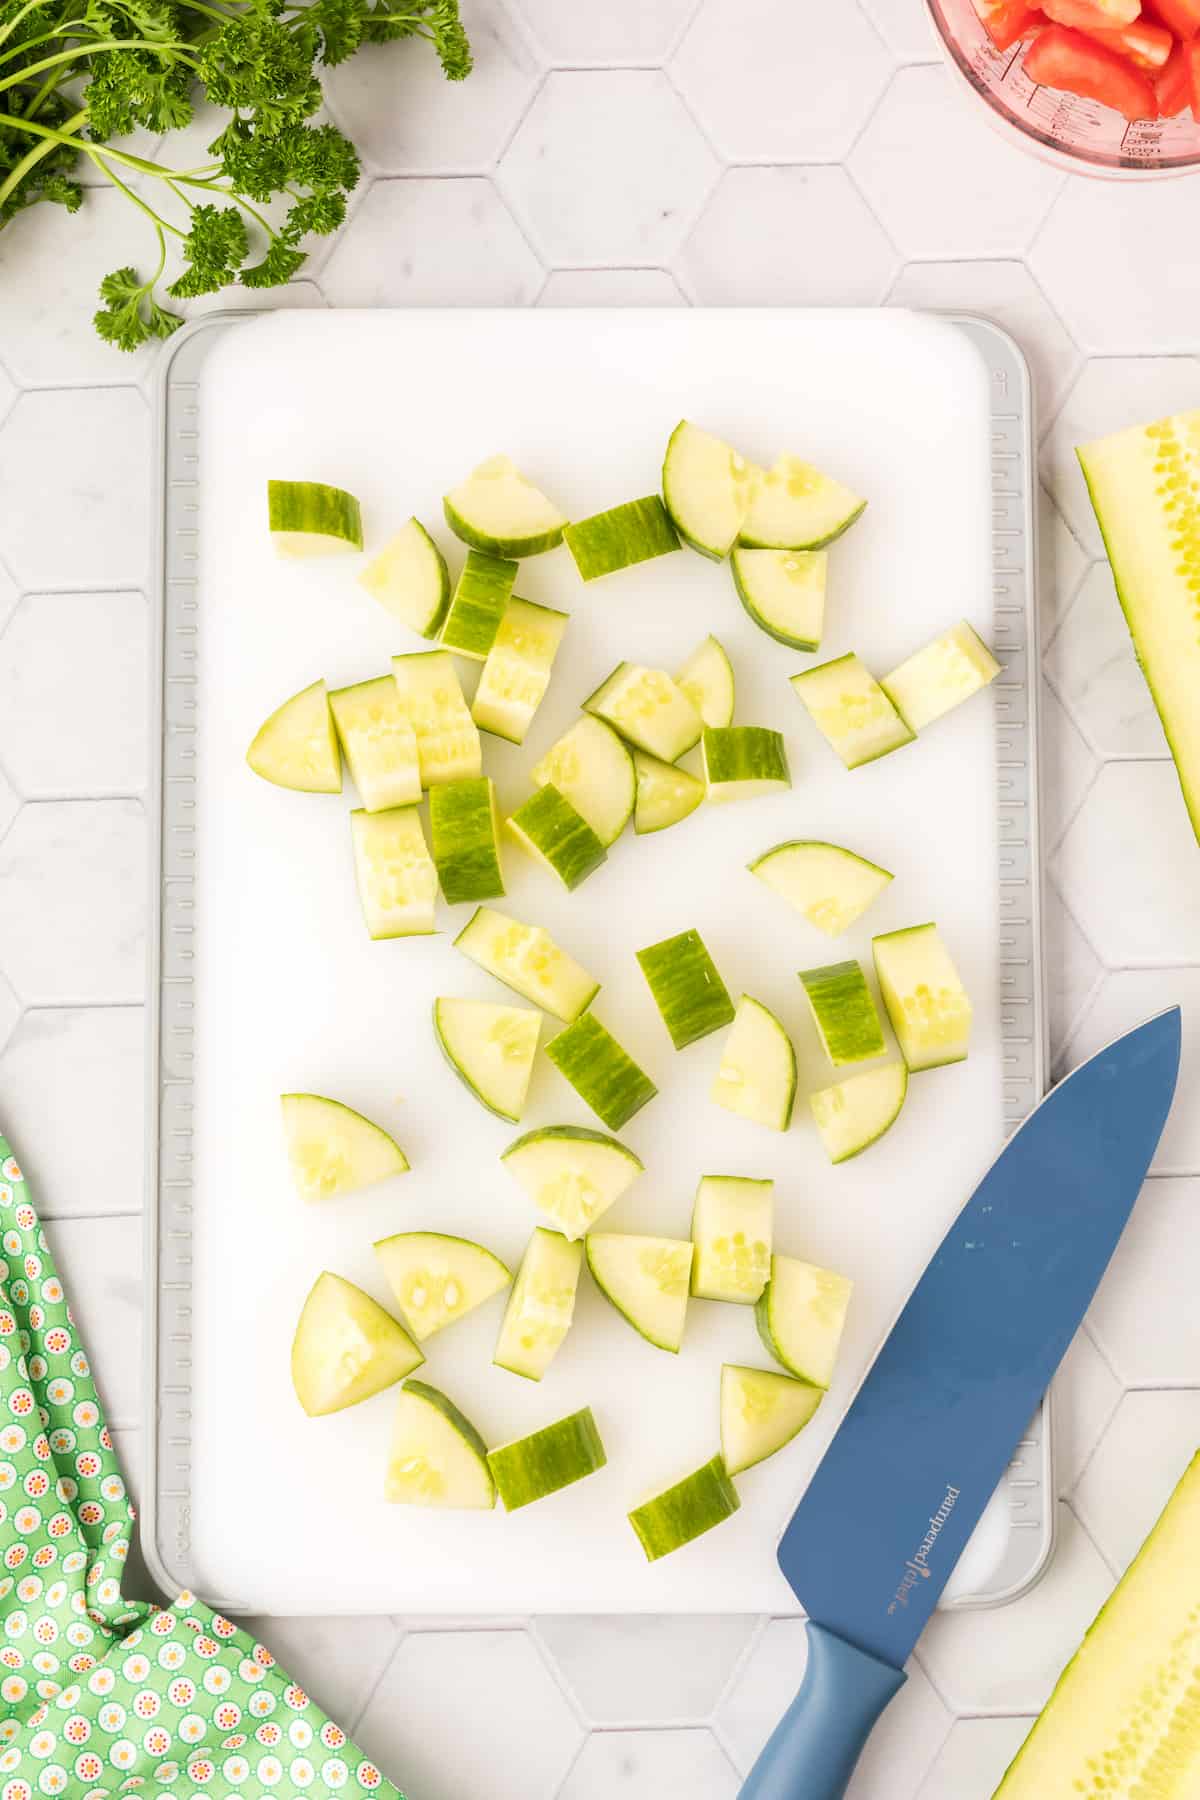 Sliced cucumbers on a cutting board with a knife.